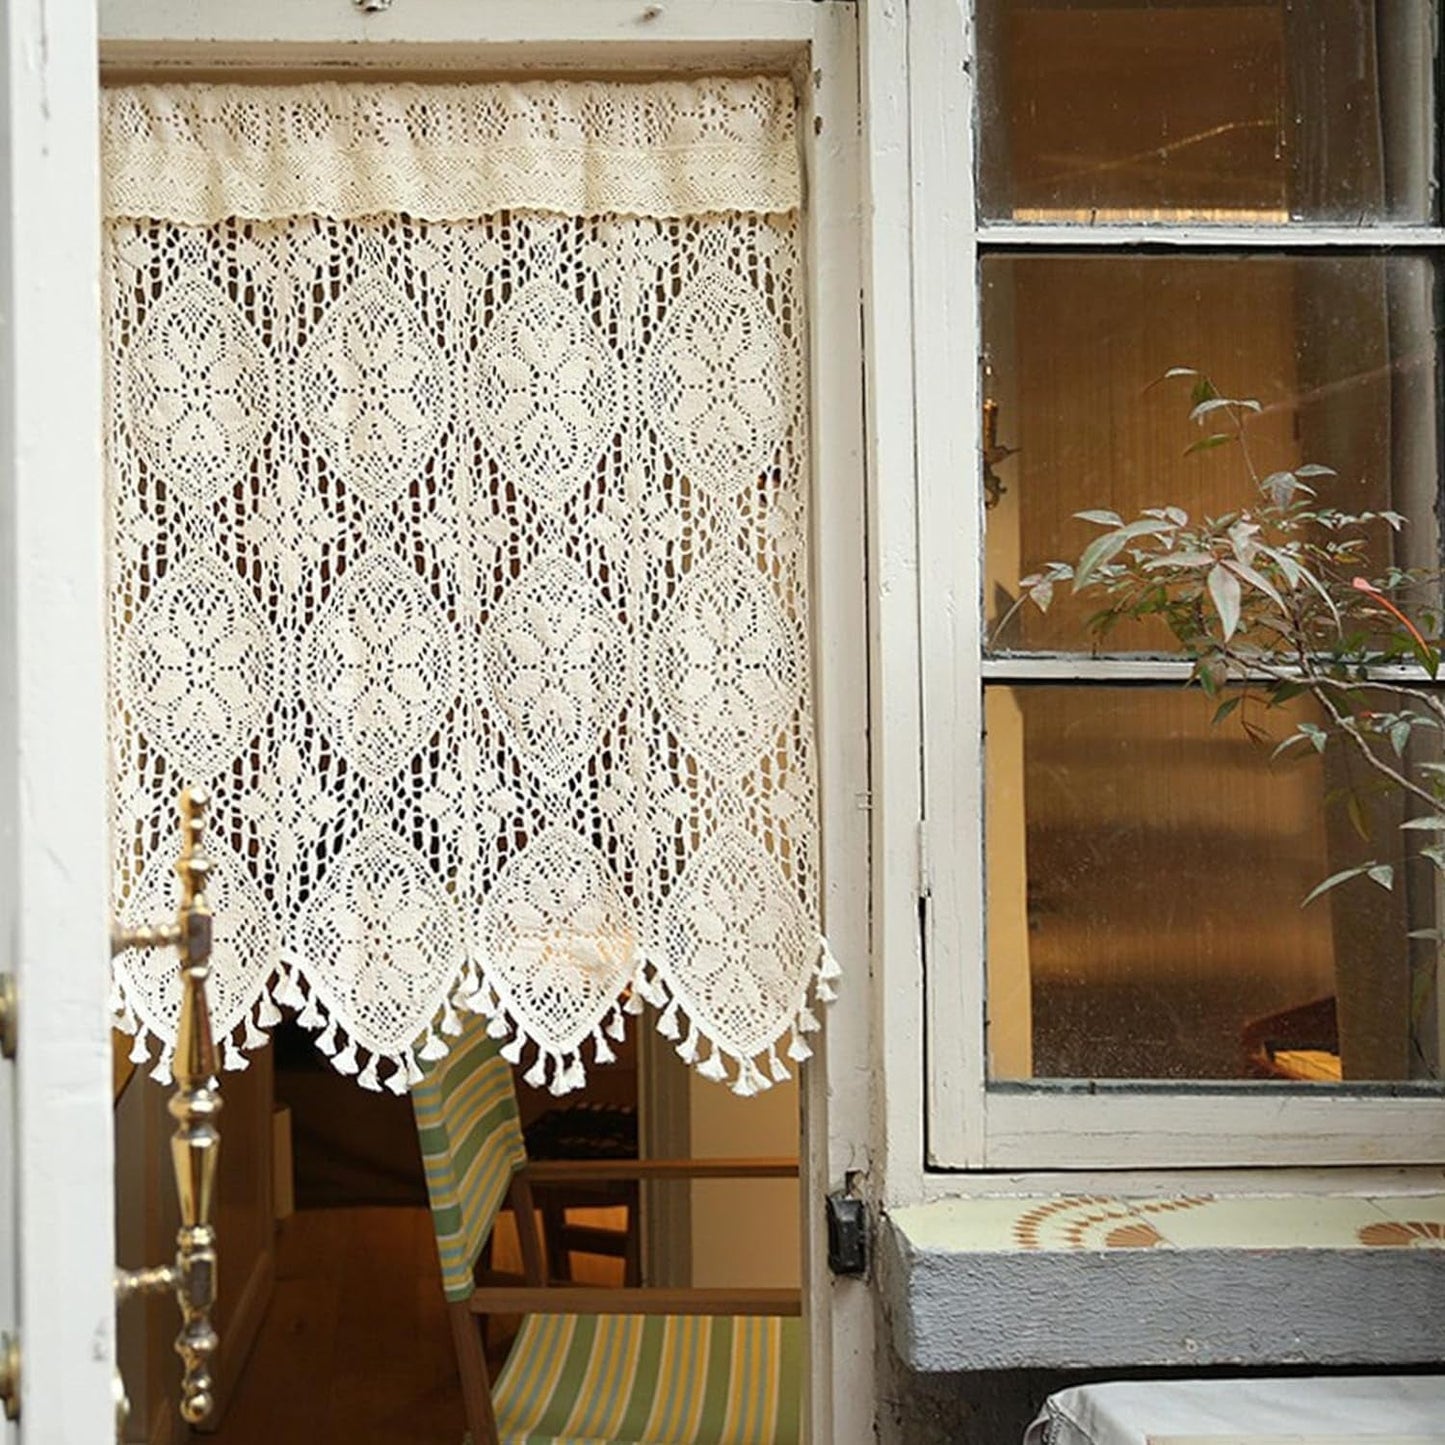 Boho Crochet Curtain Valance for Kitchen Window Retro Rustic Cotton Lace Sheer Short Curtains Farmhouse Vintage Rod Pocket with Tassels for Bathroom Cafe Decor,1 Panel 22"×16"